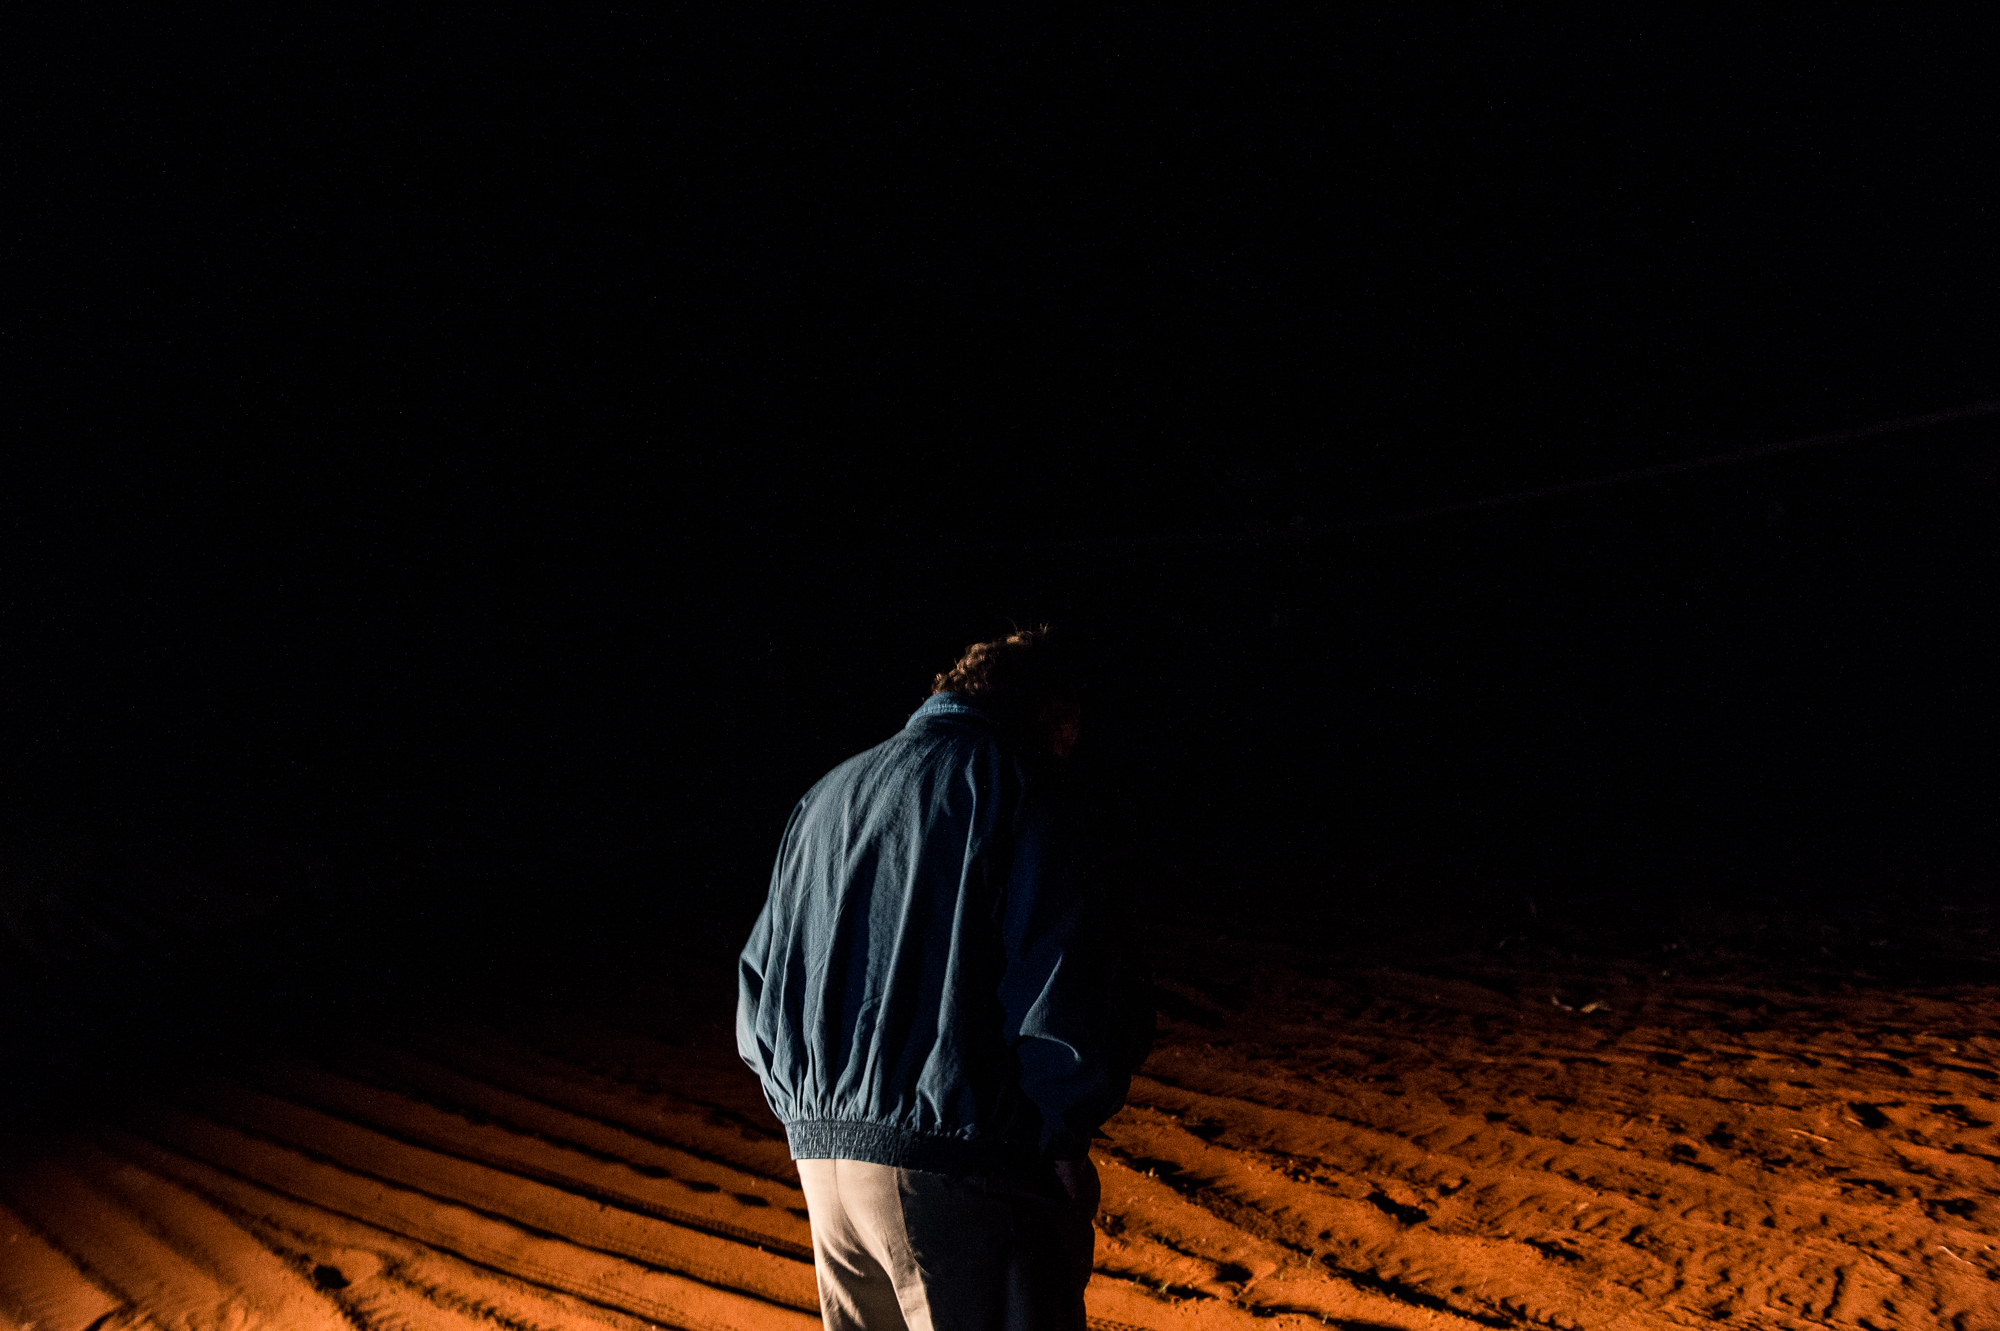  South Africa, Northern Cape, 03.08.2018 // Willem, a farmer in the Karoo Desert, living next to Orania, Northern Cape. At night he is turning on the irrigation for the fields. // Lucas Bäuml 